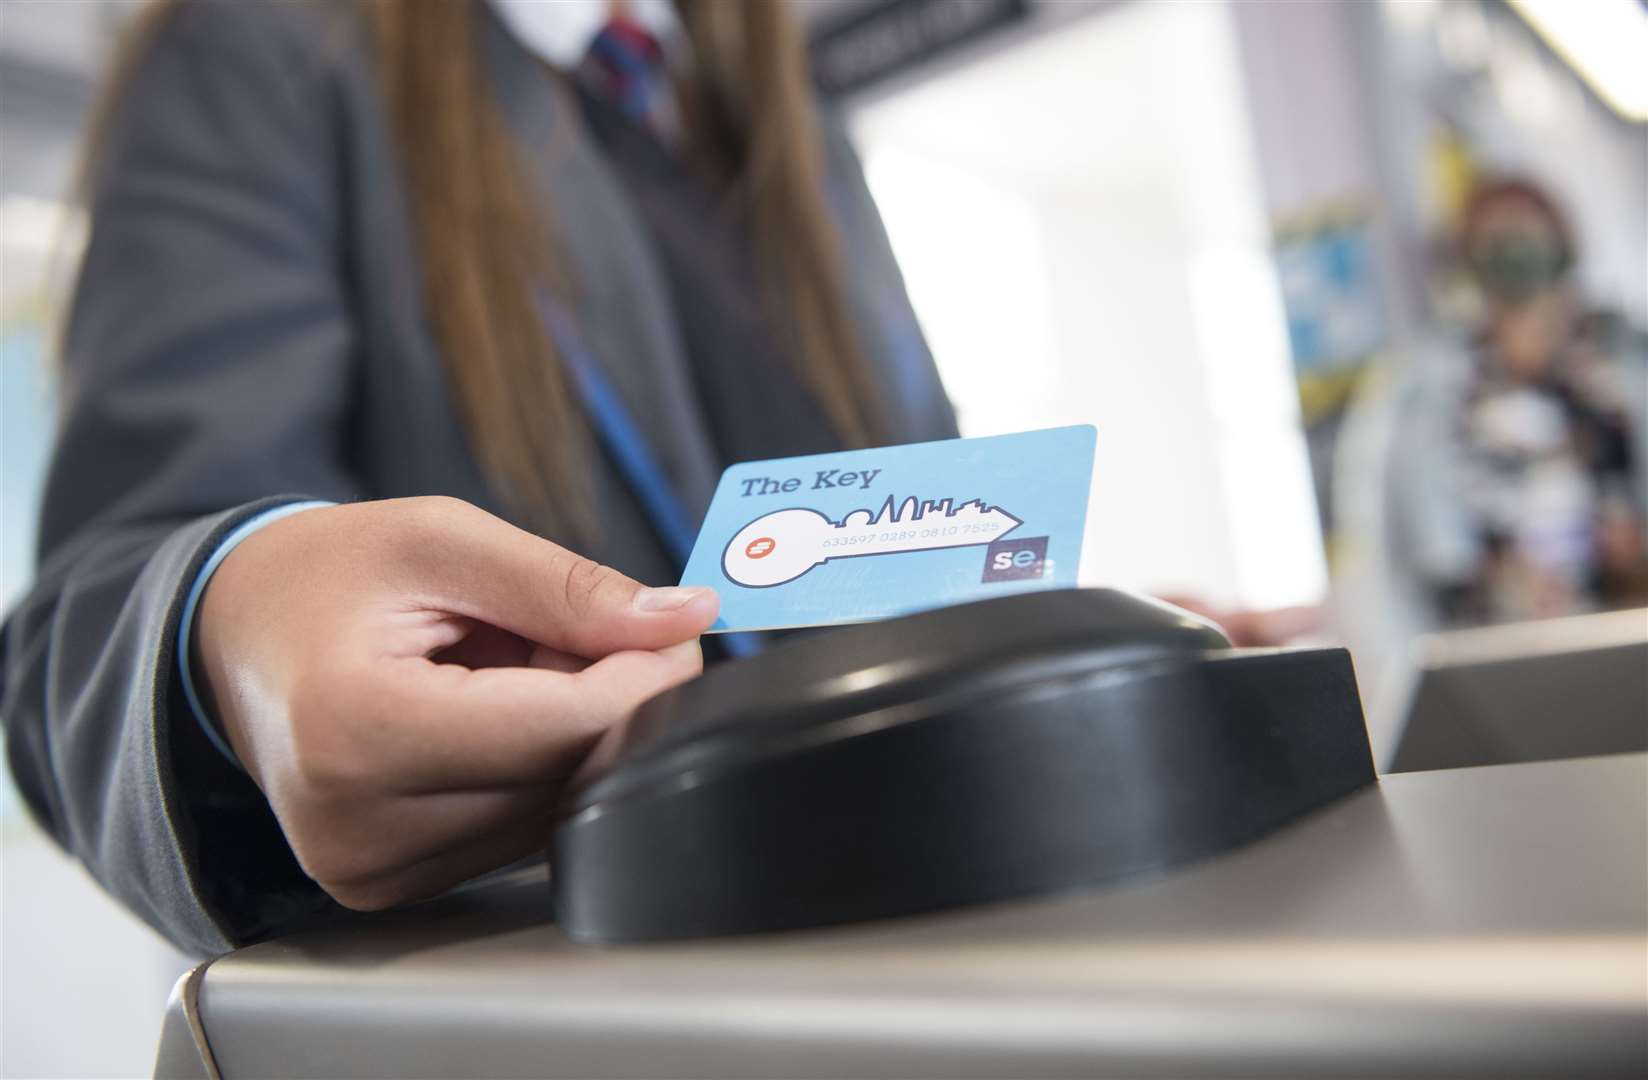 Students are able to register online for contactless ticketing to make their journey safer and more convenient